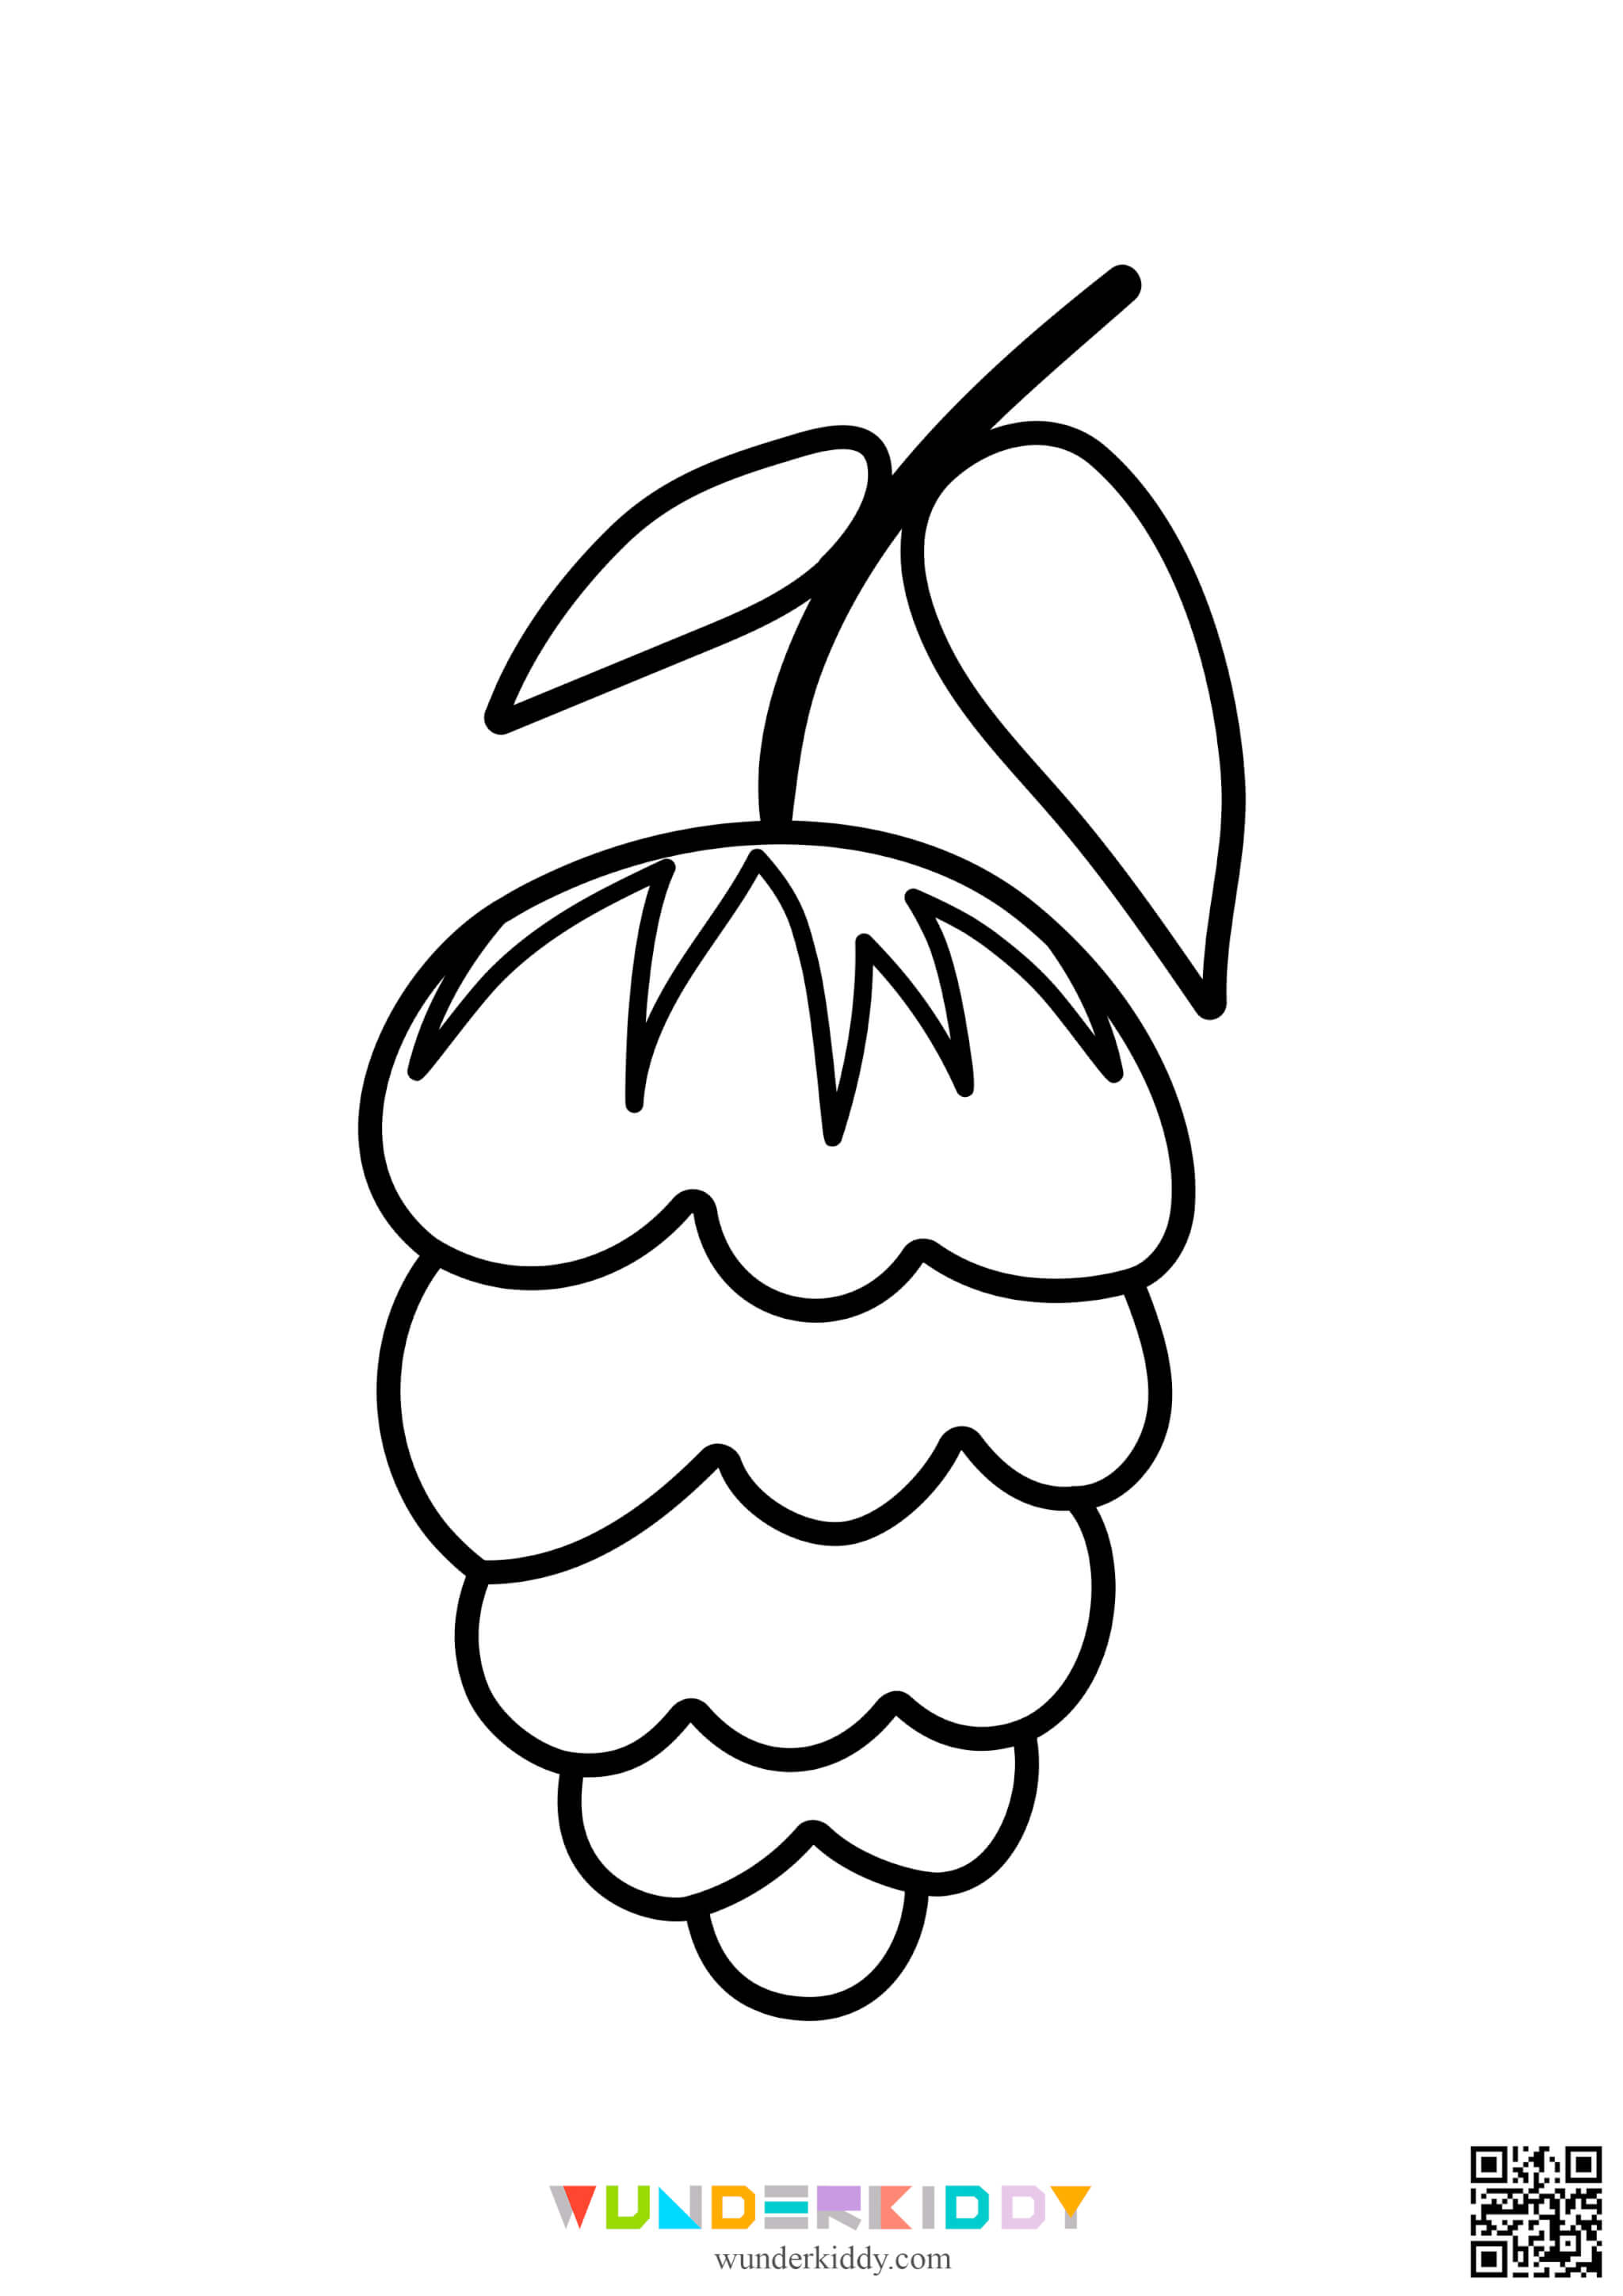 Fall Coloring Pages - Image 26